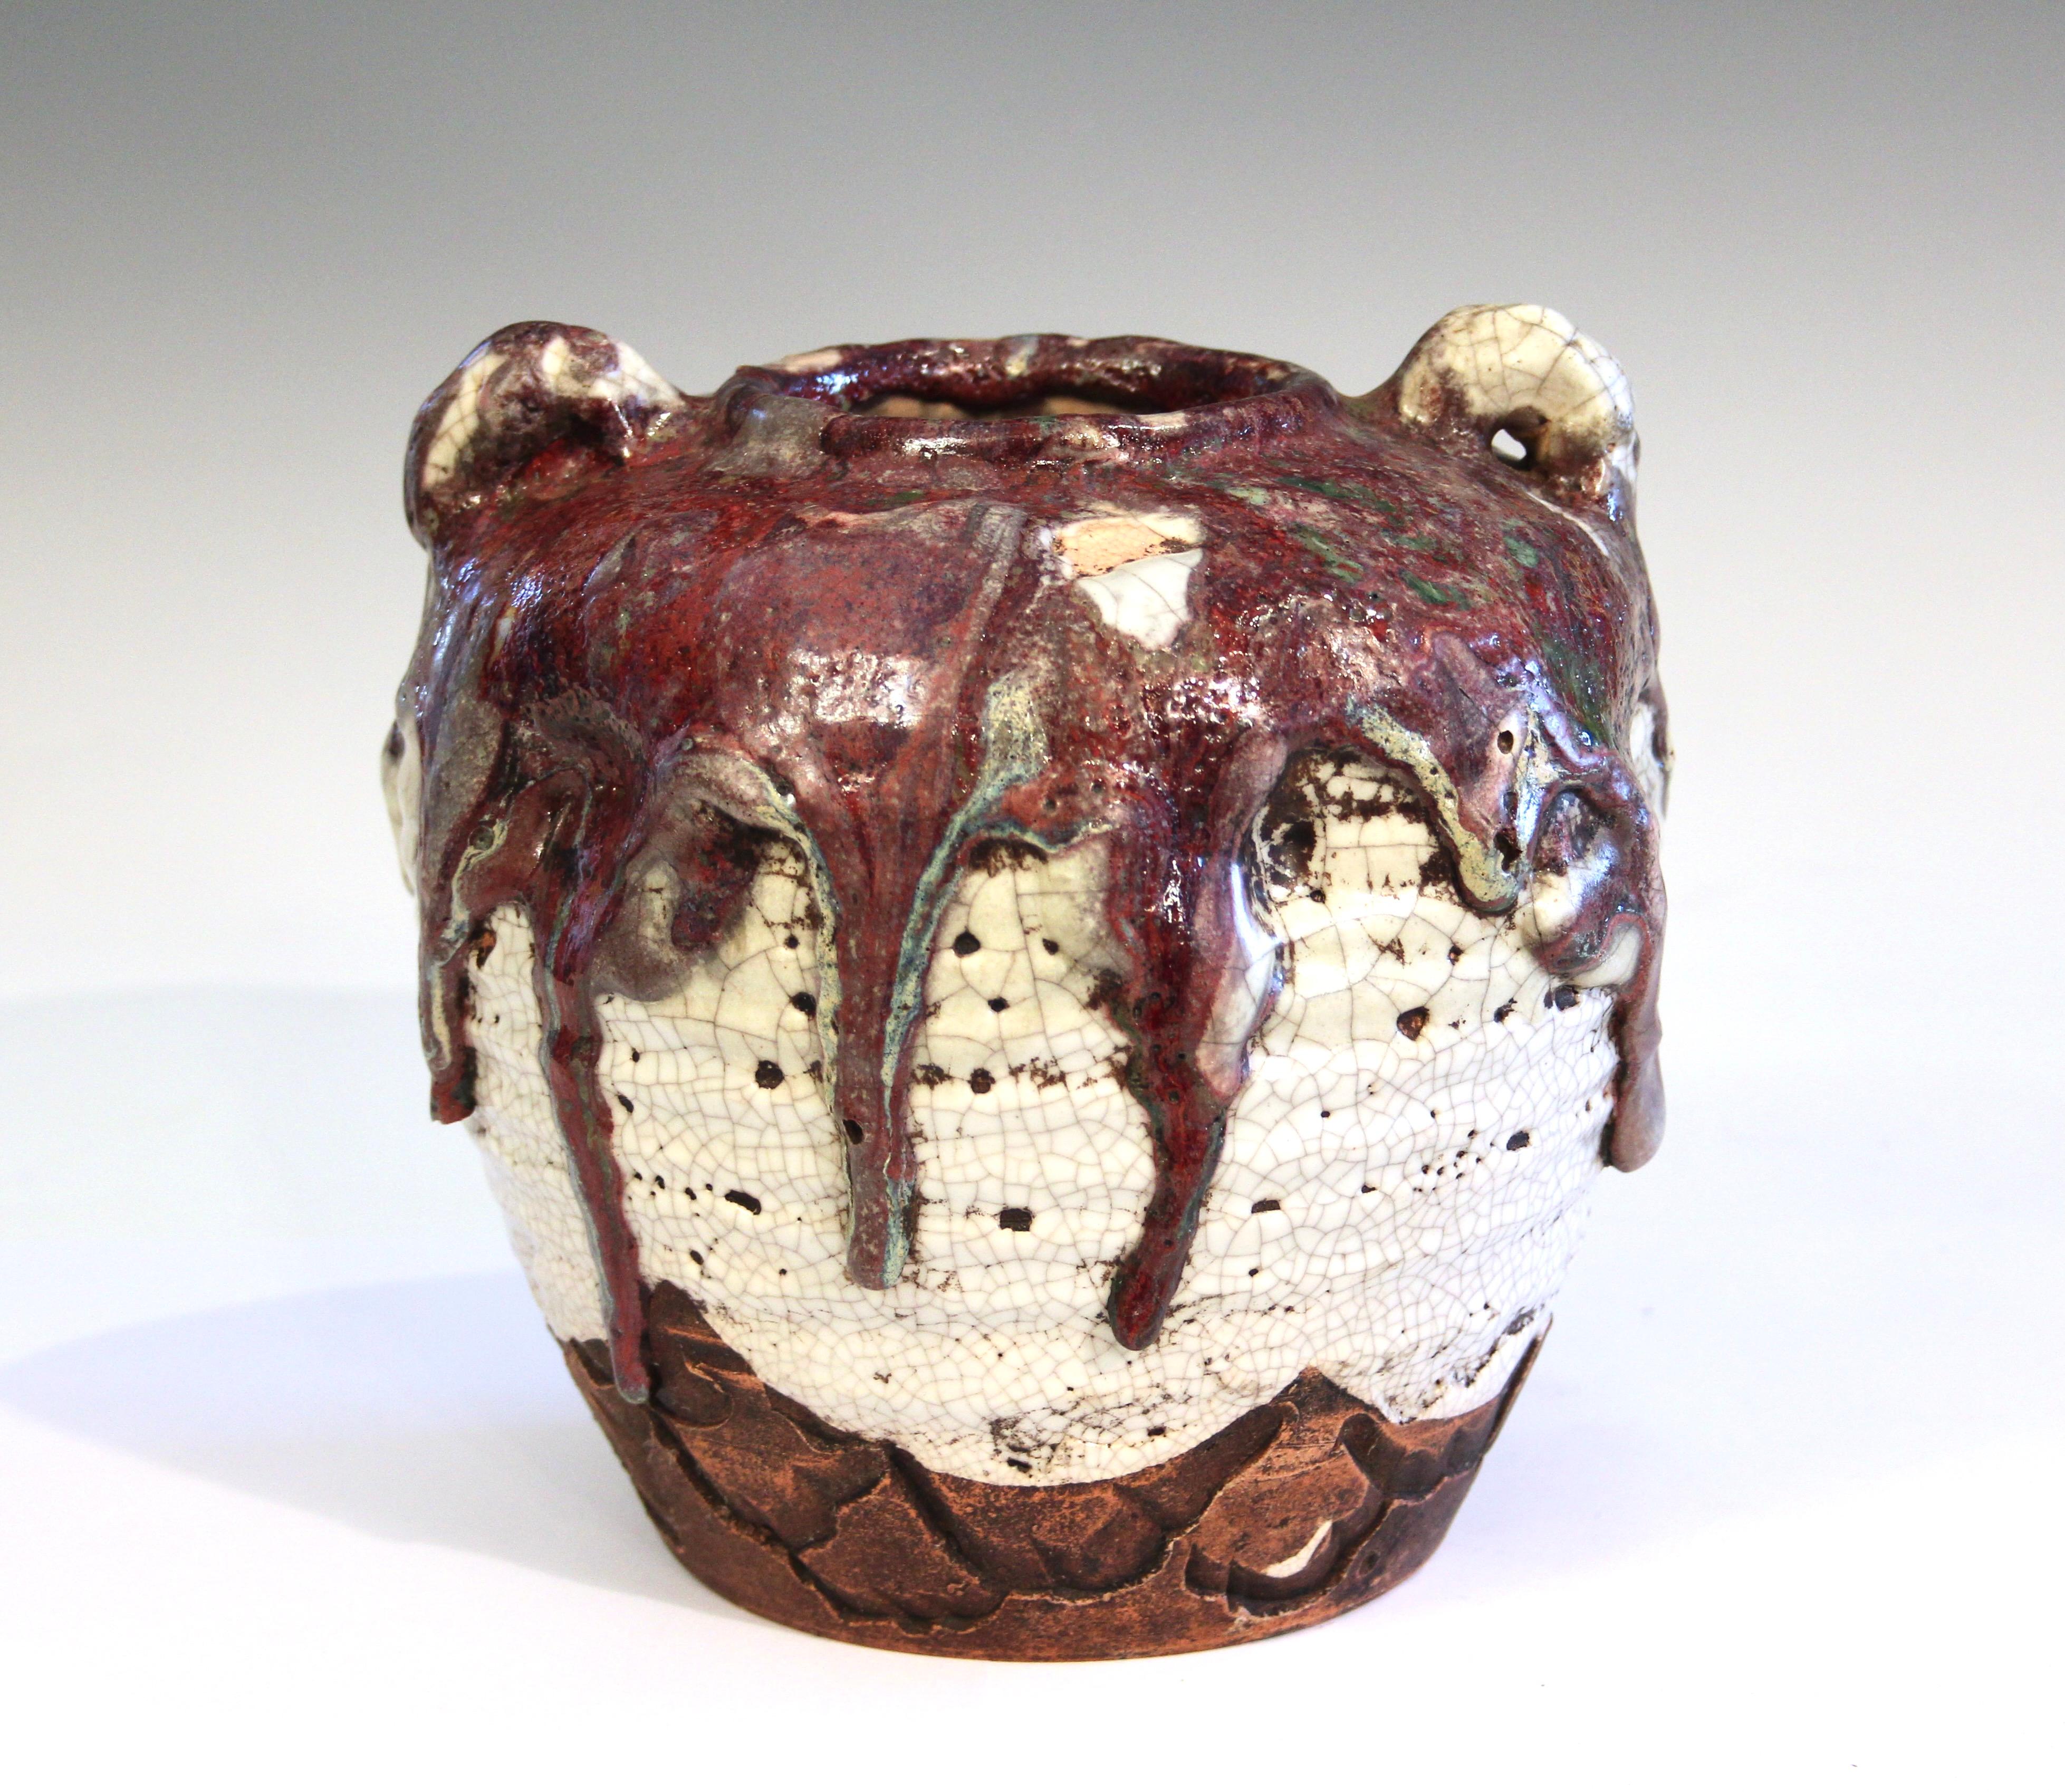 Vintage Awaji pottery tortured and manipulated vase with two little ears at the shoulder and great suspended drips on an off white crackle glaze ground, circa 1930. 7 1/2